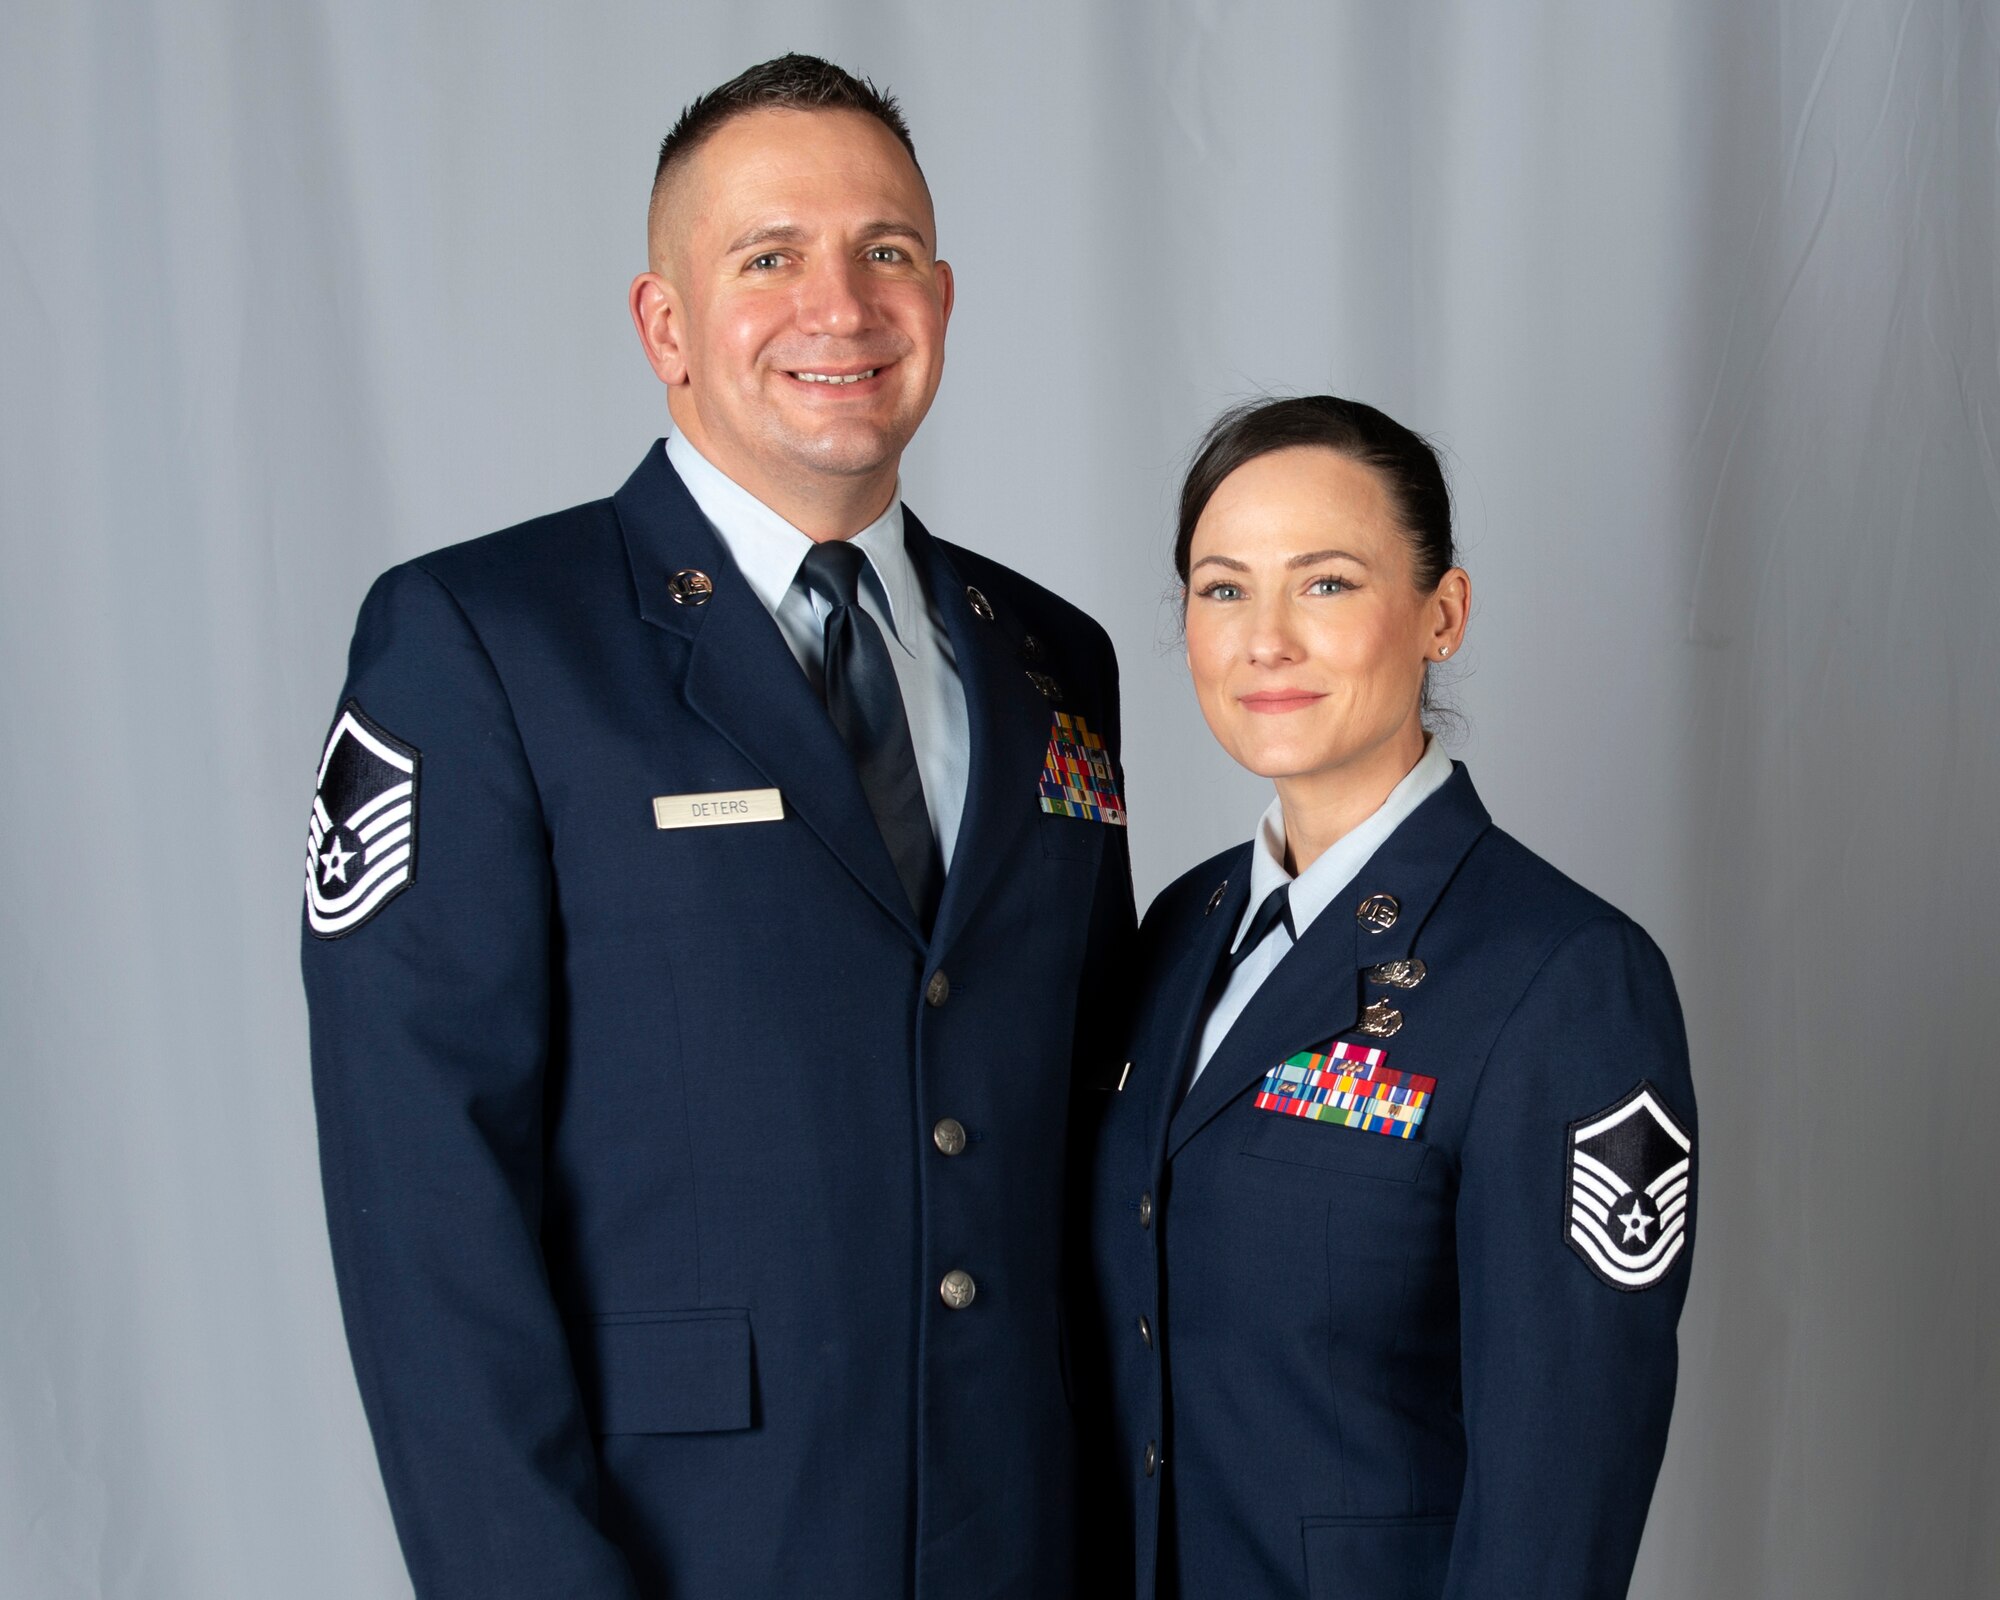 Alaska Air National Guard Master Sergeants Franz and Jessica Deters, pose for a photo at Joint Base Elmendorf-Richardson, Alaska, Nov. 7, 2019. Franz and Jessica are both assigned to the 176th Force Support Flight as a sustainment services superintendent and installation personnel readiness specialist respectively. The Deters, who married in 2012, transitioned to the ANG after serving in the U.S. Marine Corps.